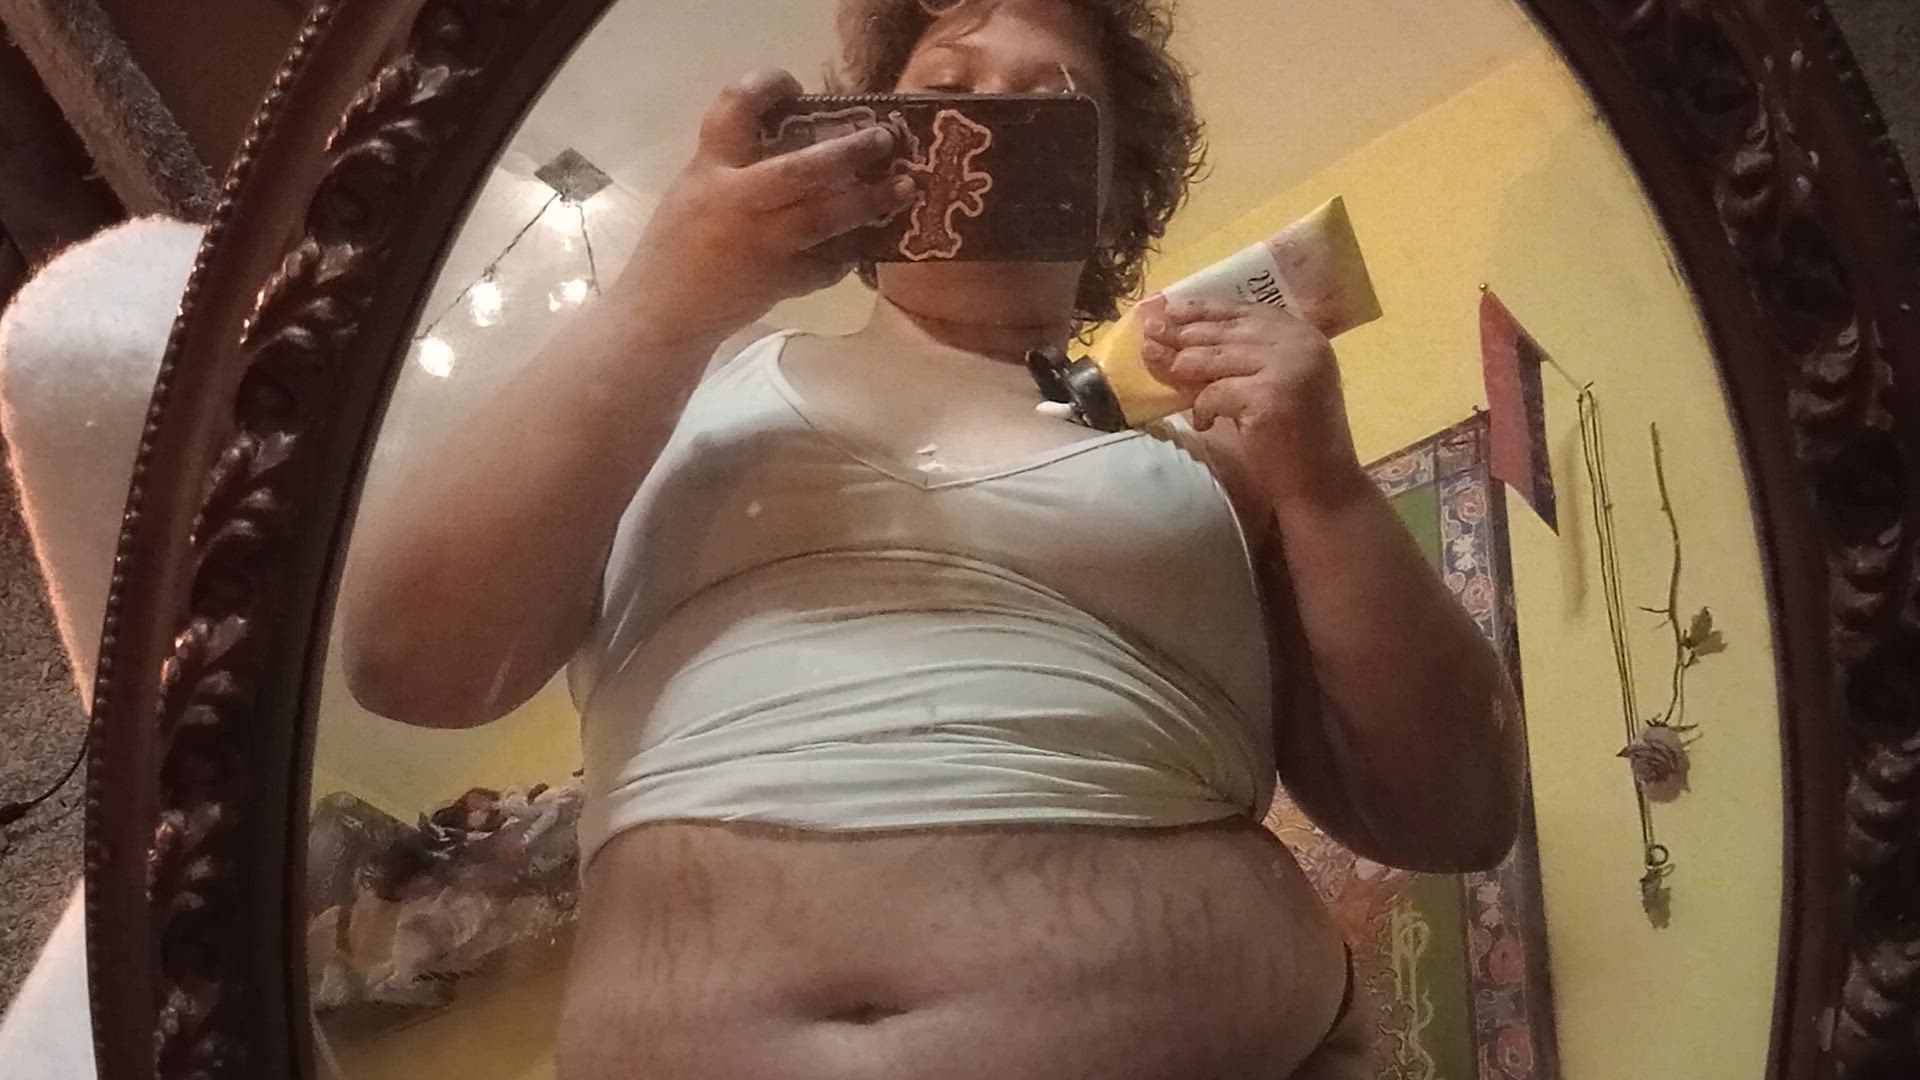 BBW porn video with onlyfans model bubblekittygoddess <strong>@bubblekittygoddess</strong>